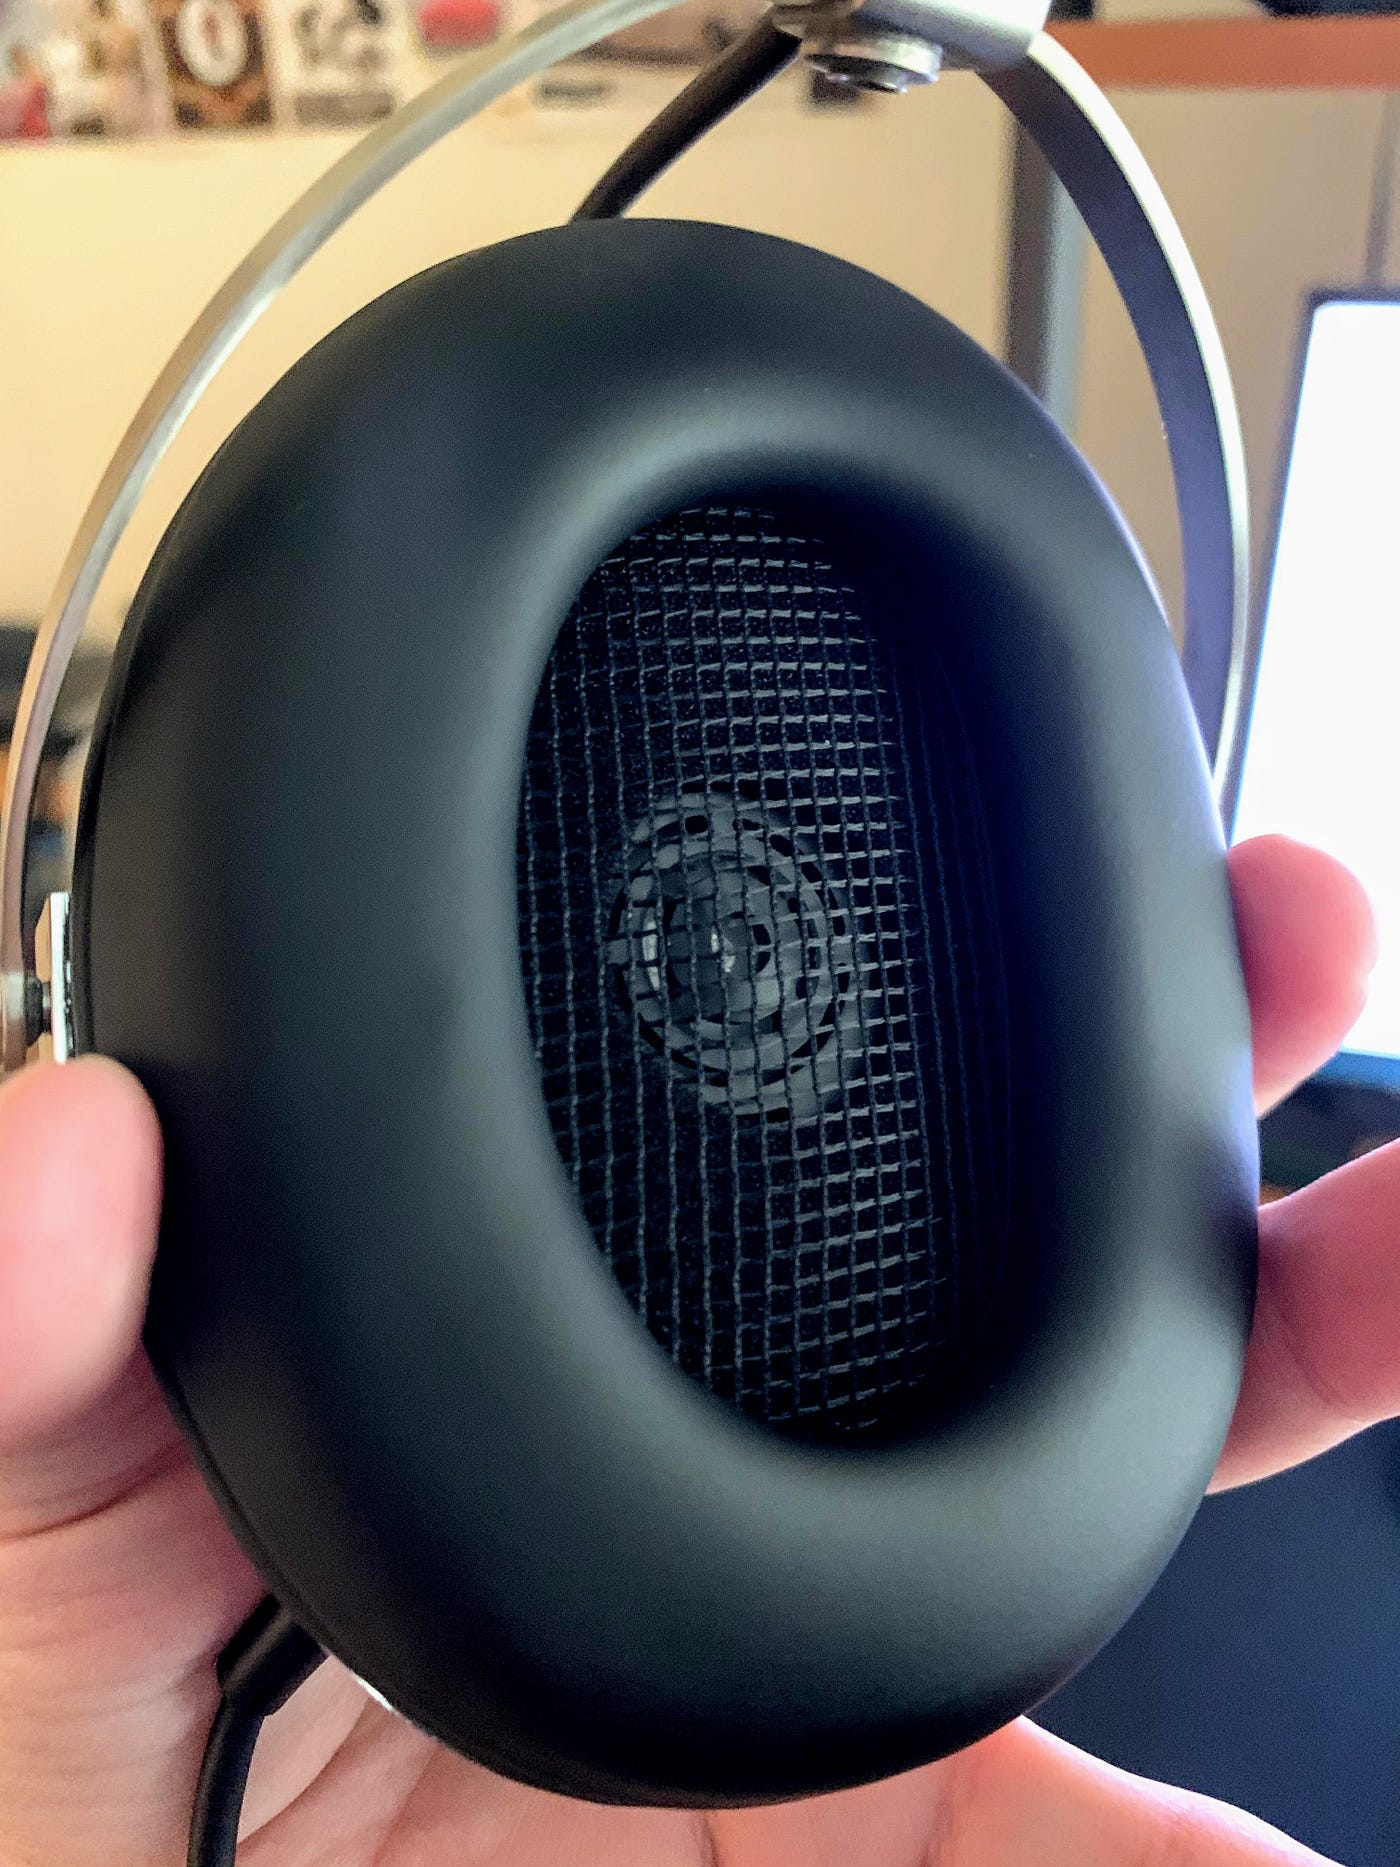 Koss Pro 4AA Headphones Review. Not all legends are good | by Alex Rowe |  Medium